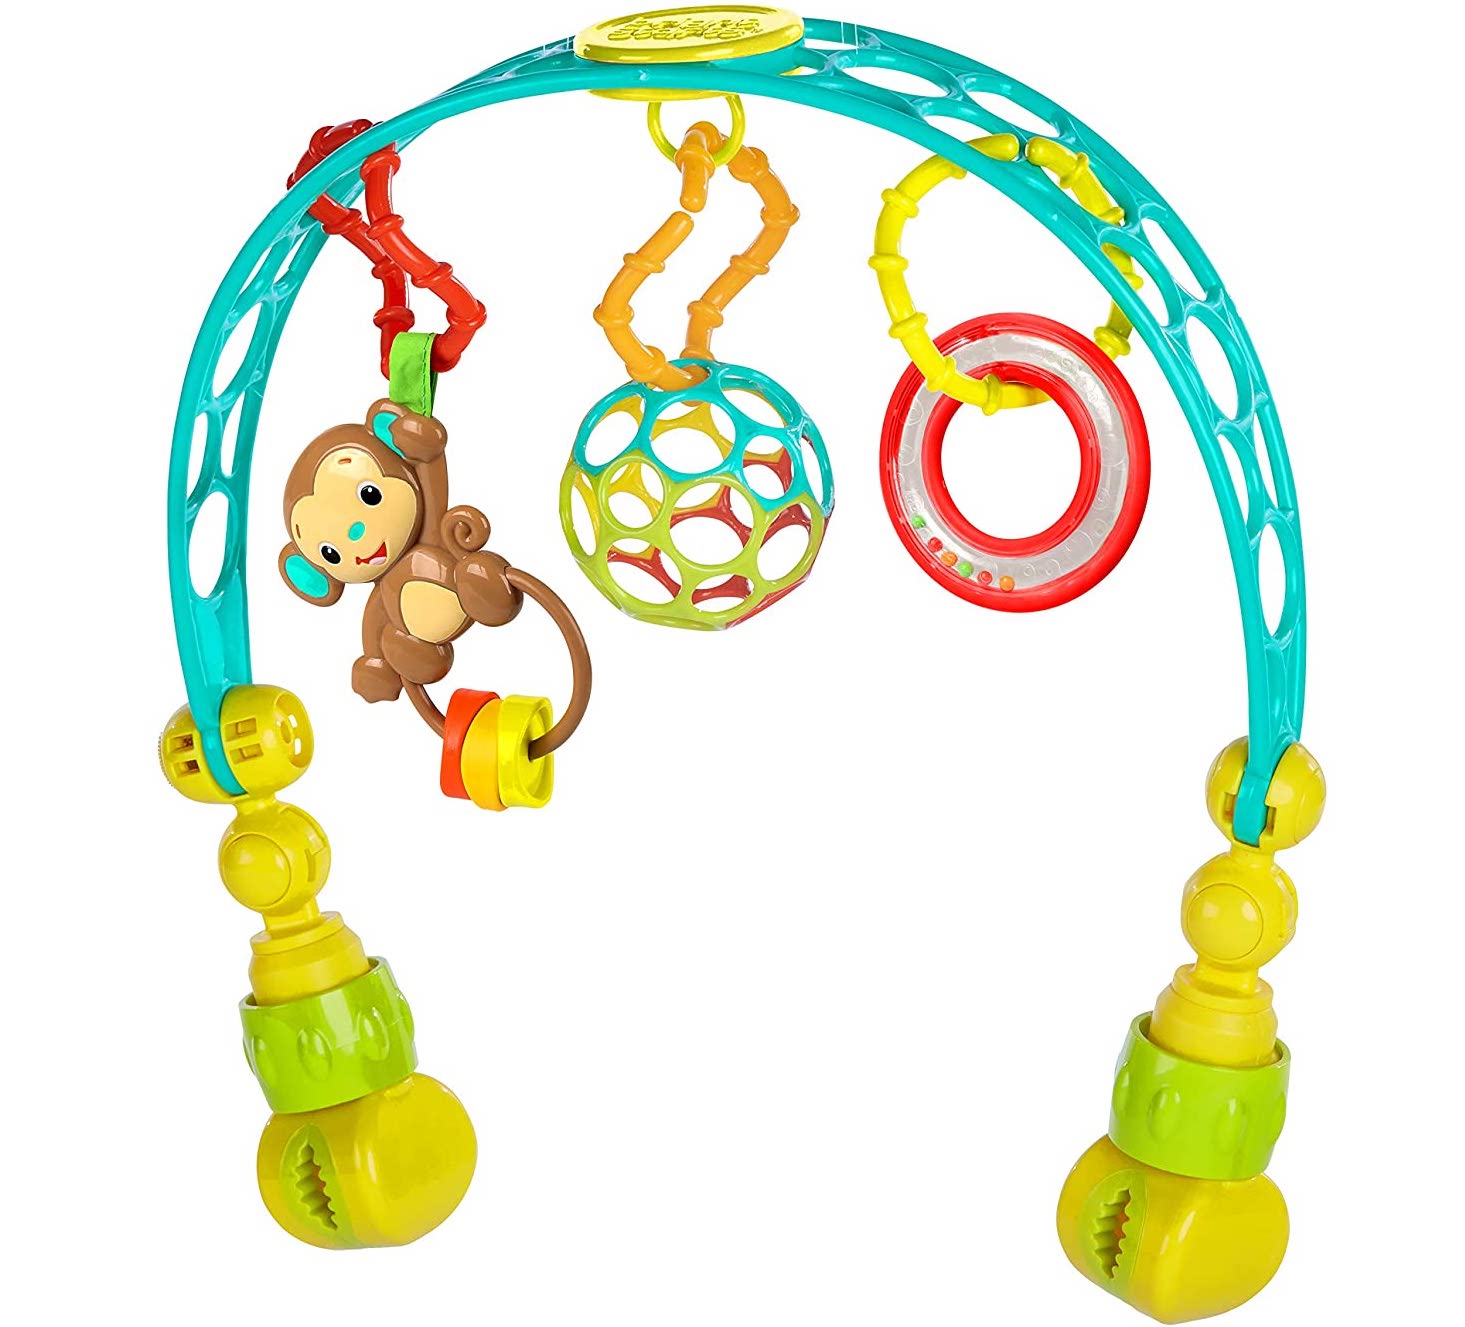 Blue arch with different toys hanging from it and yellow and green handles